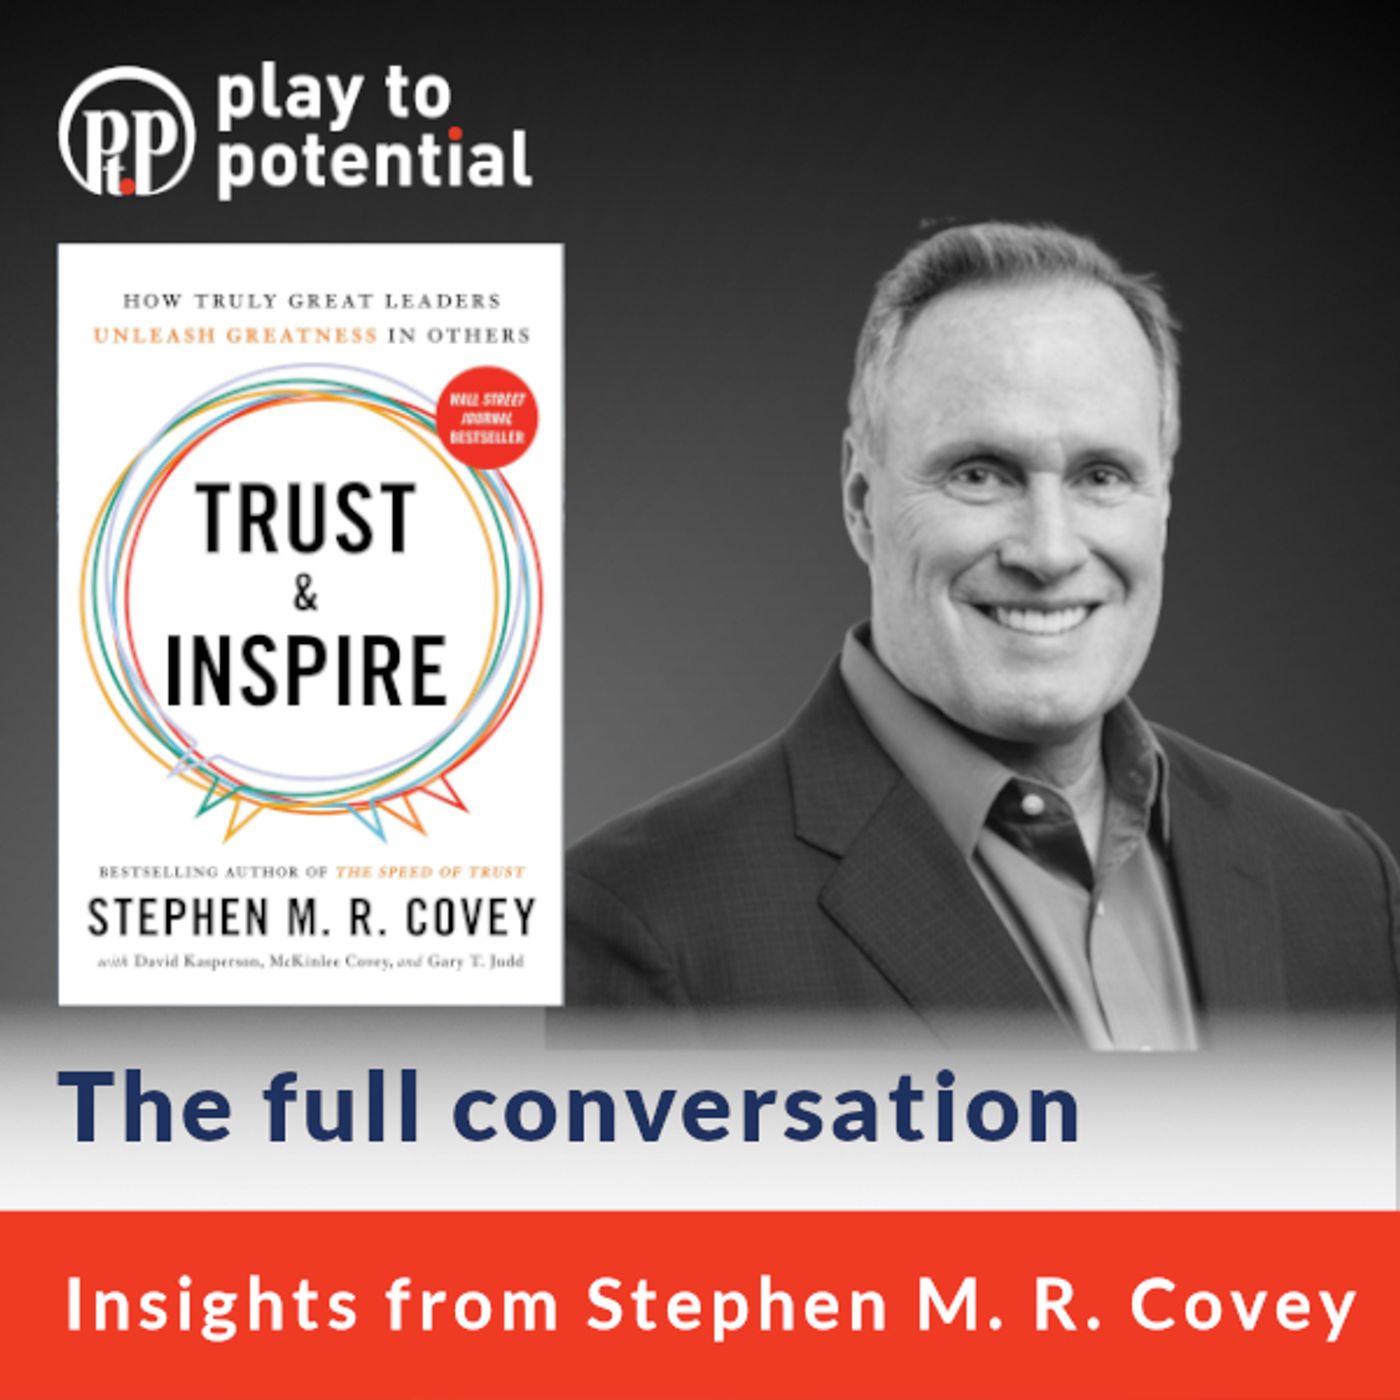 675: 101.00 - Stephen M.R. Covey on Trust and Inspire - Uncut